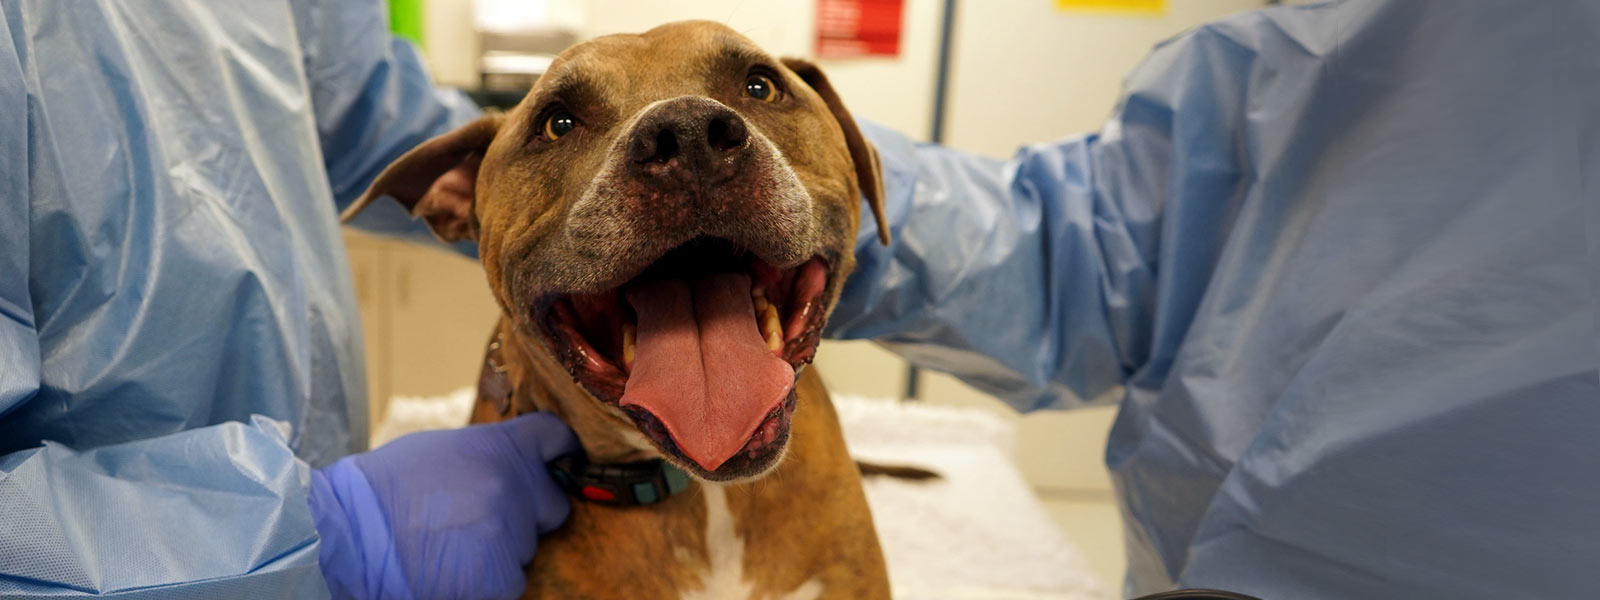 Canine cancer patient joins clinical trial